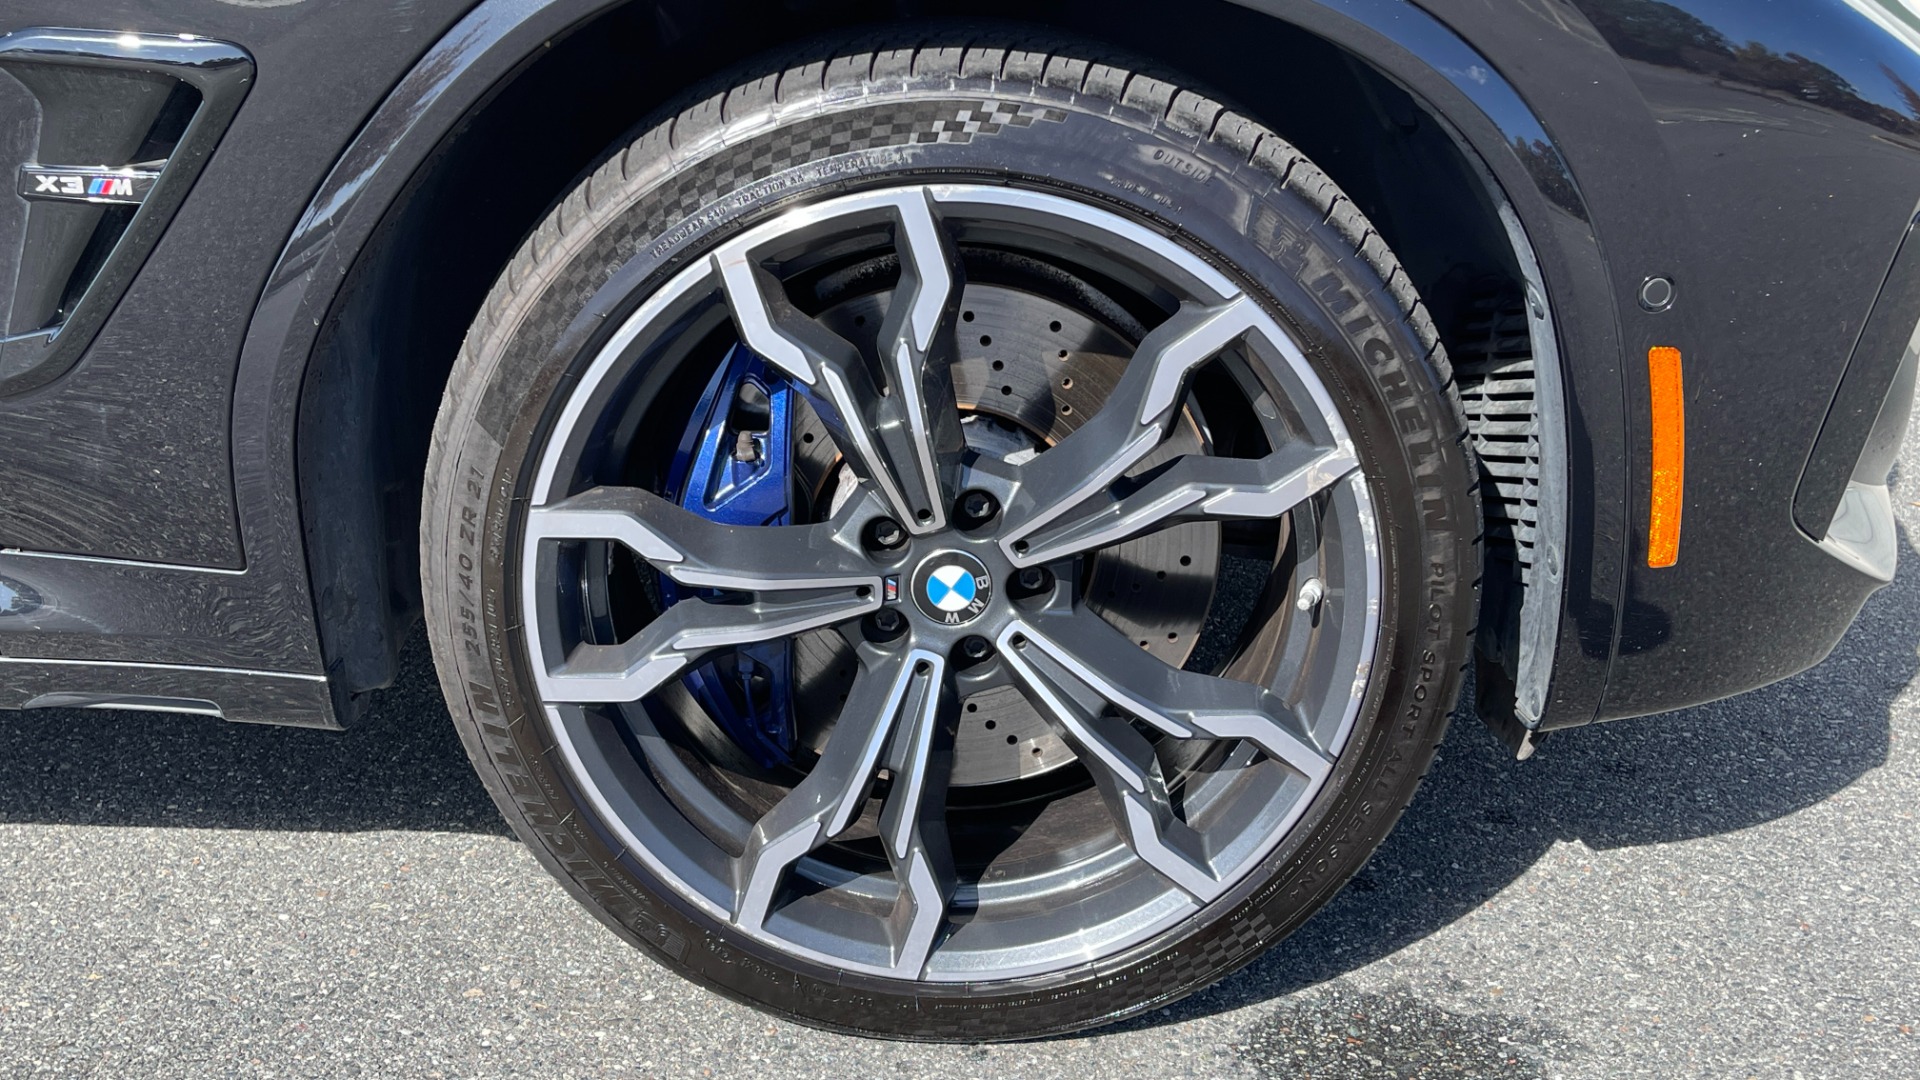 Used 2020 BMW X3 M MERINO LEATHER / EXECUTIVE PACKAGE / DINAN EXHAUST for sale $58,999 at Formula Imports in Charlotte NC 28227 48